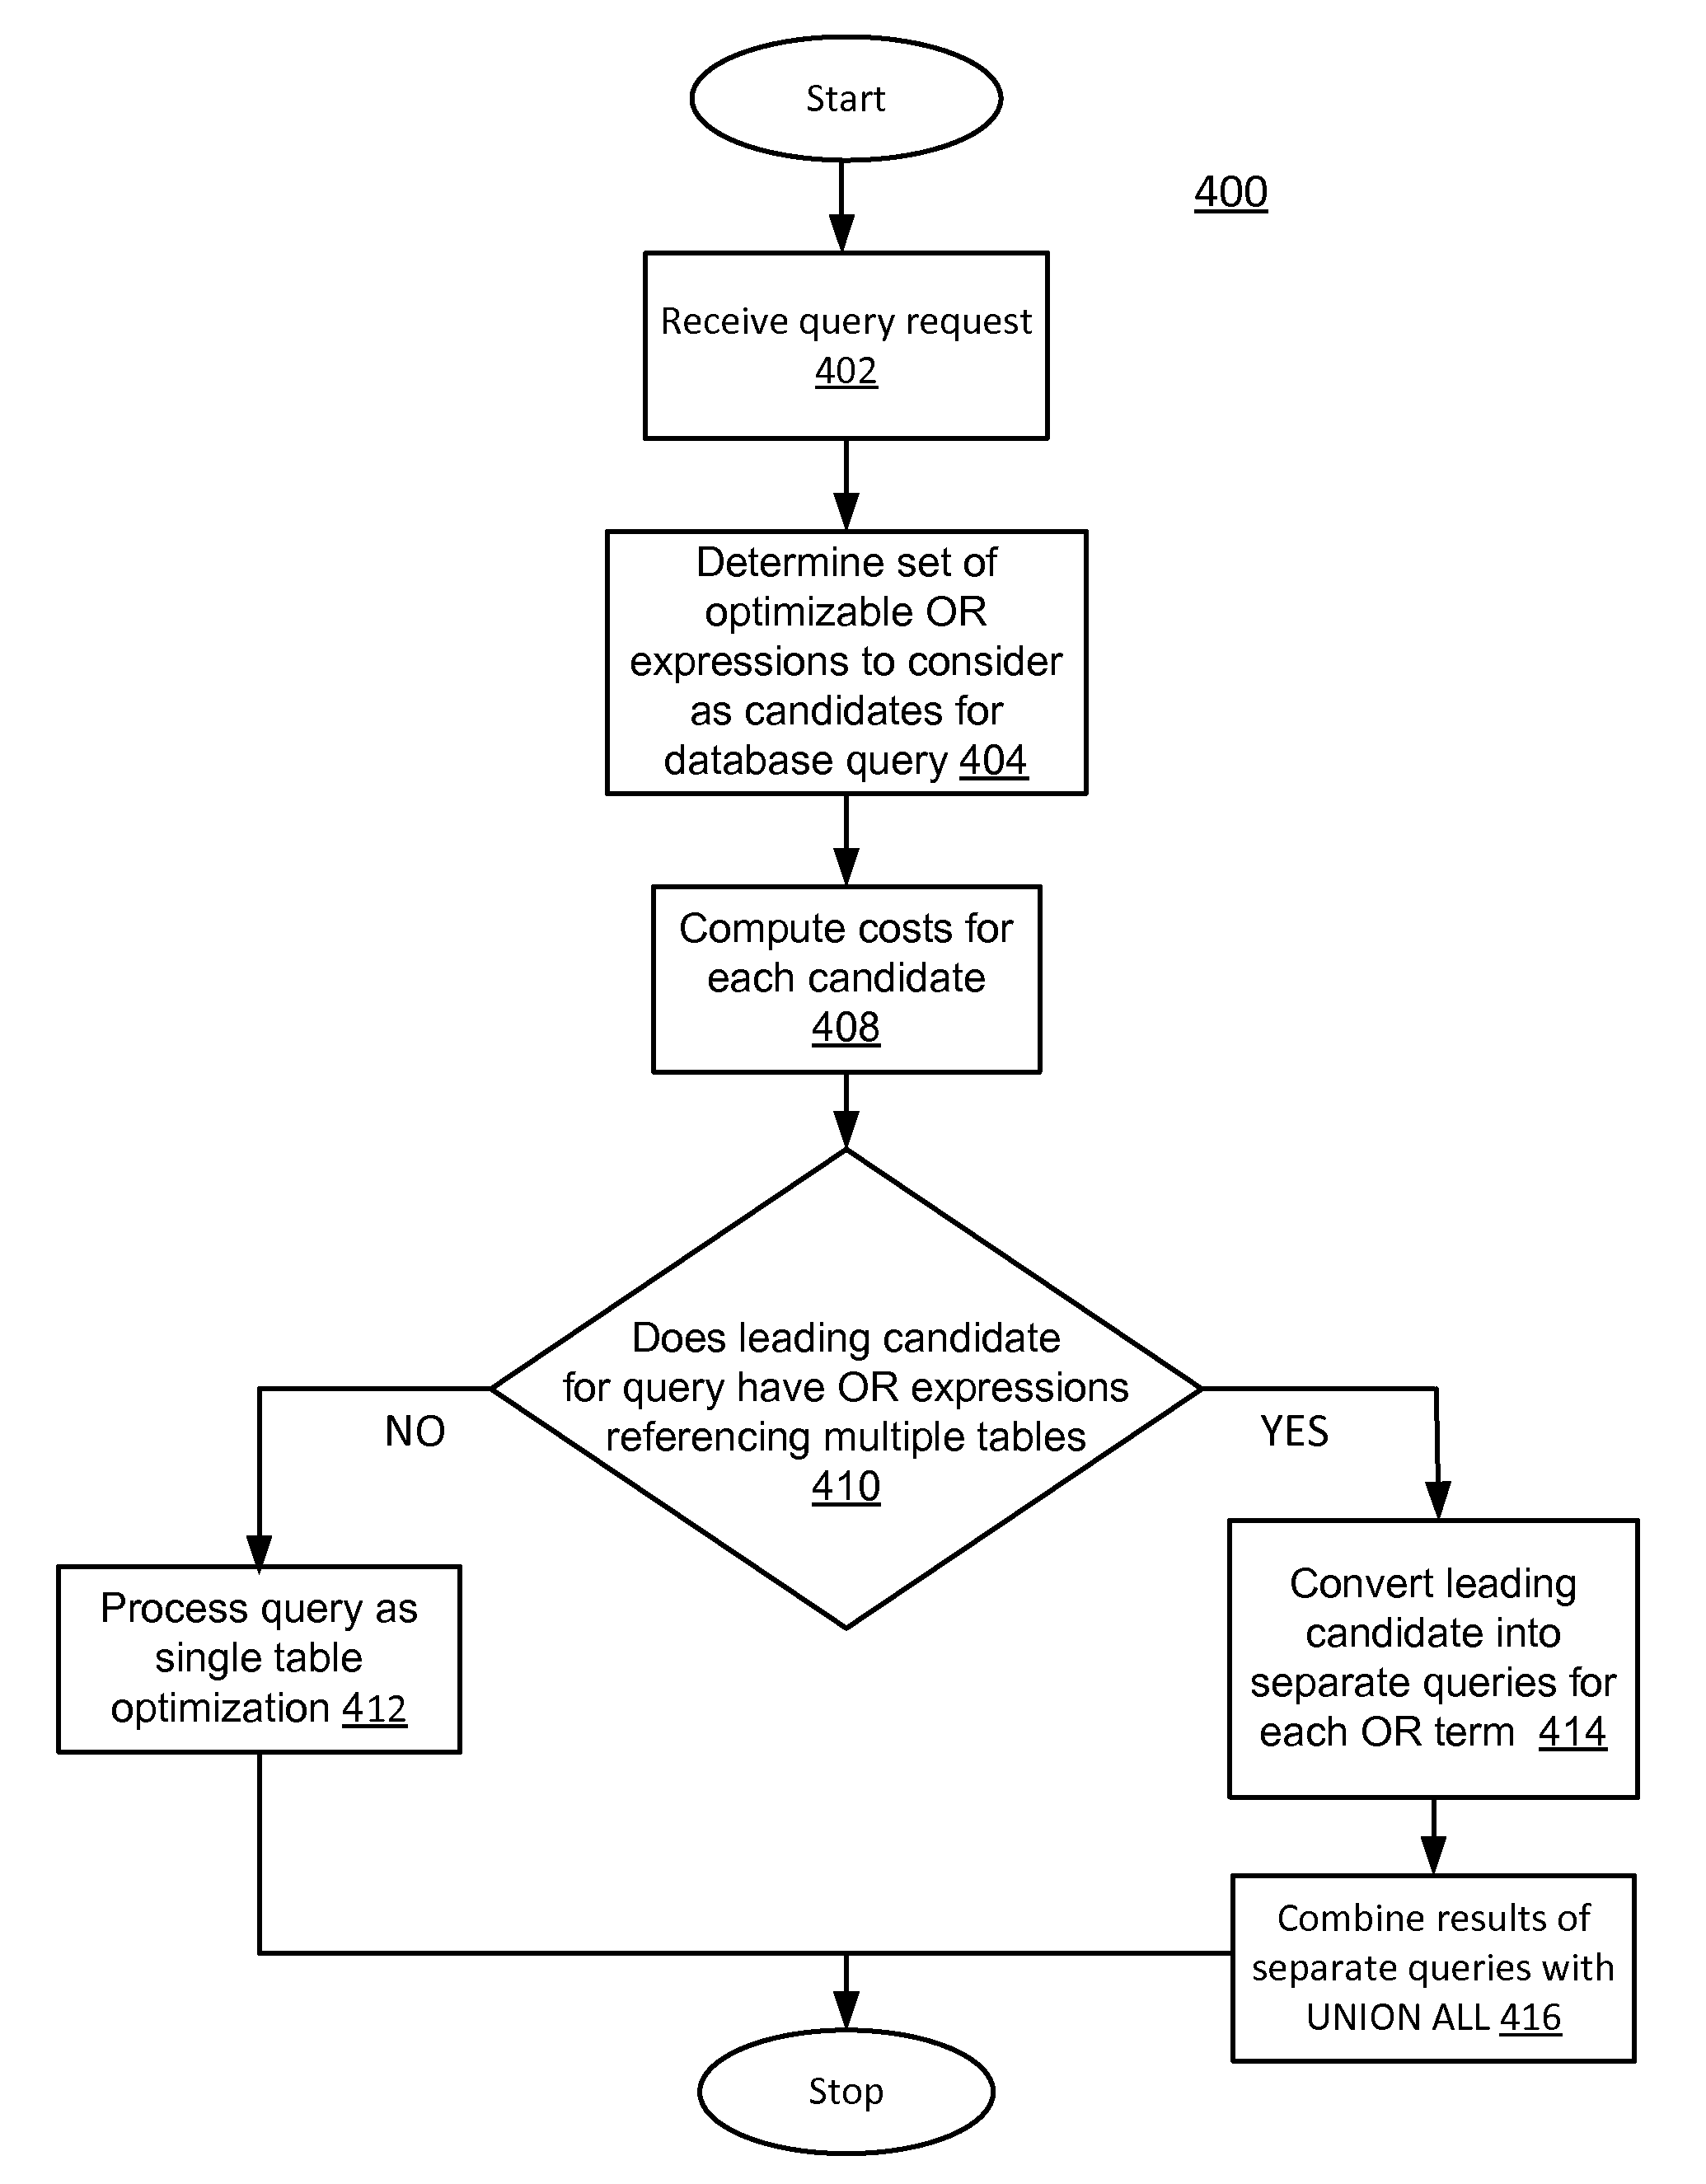 Method and System for Optimizing Queries in a Multi-Tenant Database Environment